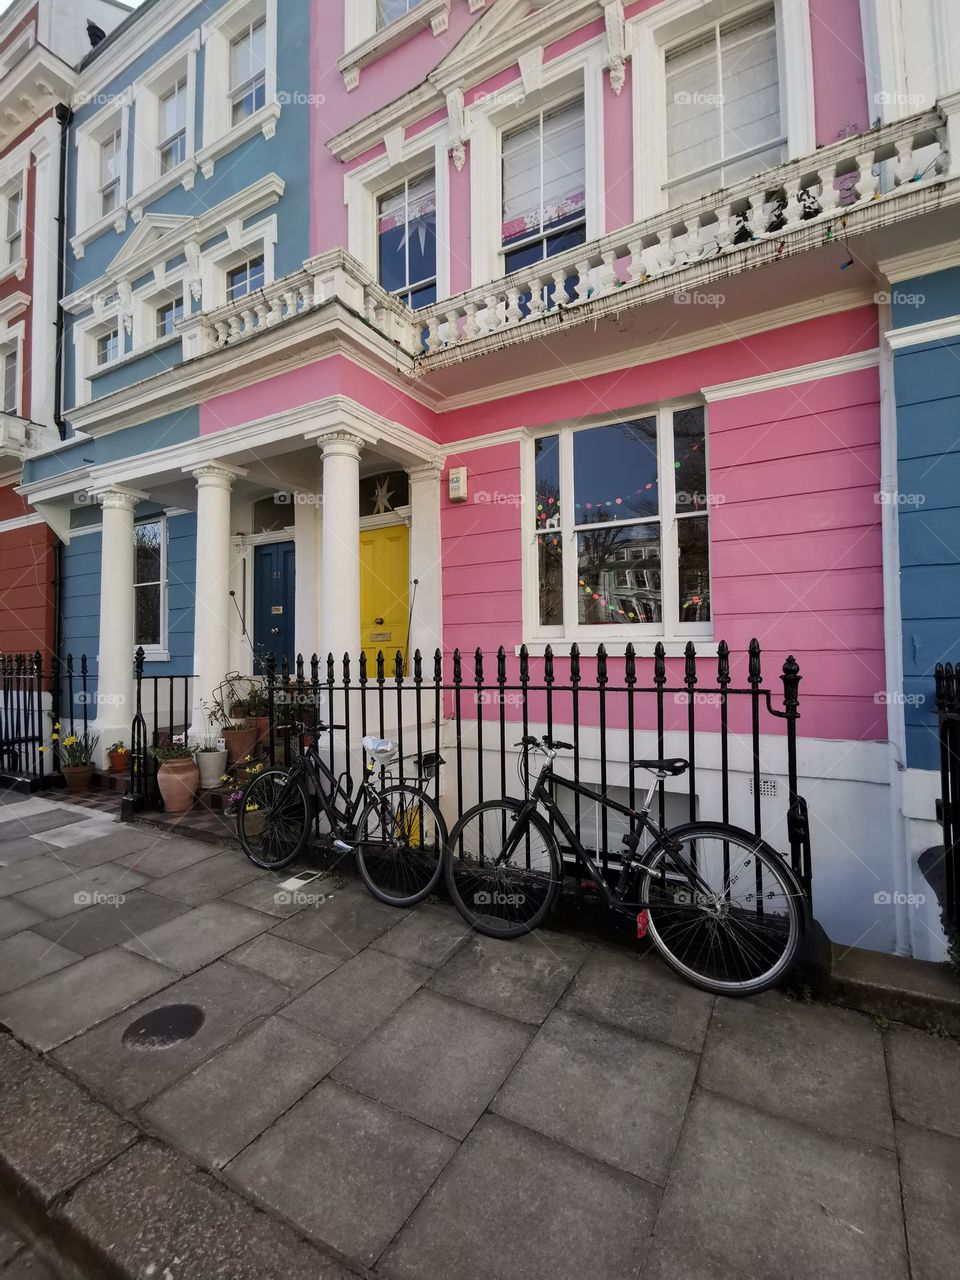 Architecture. London streets. Colourful houses.